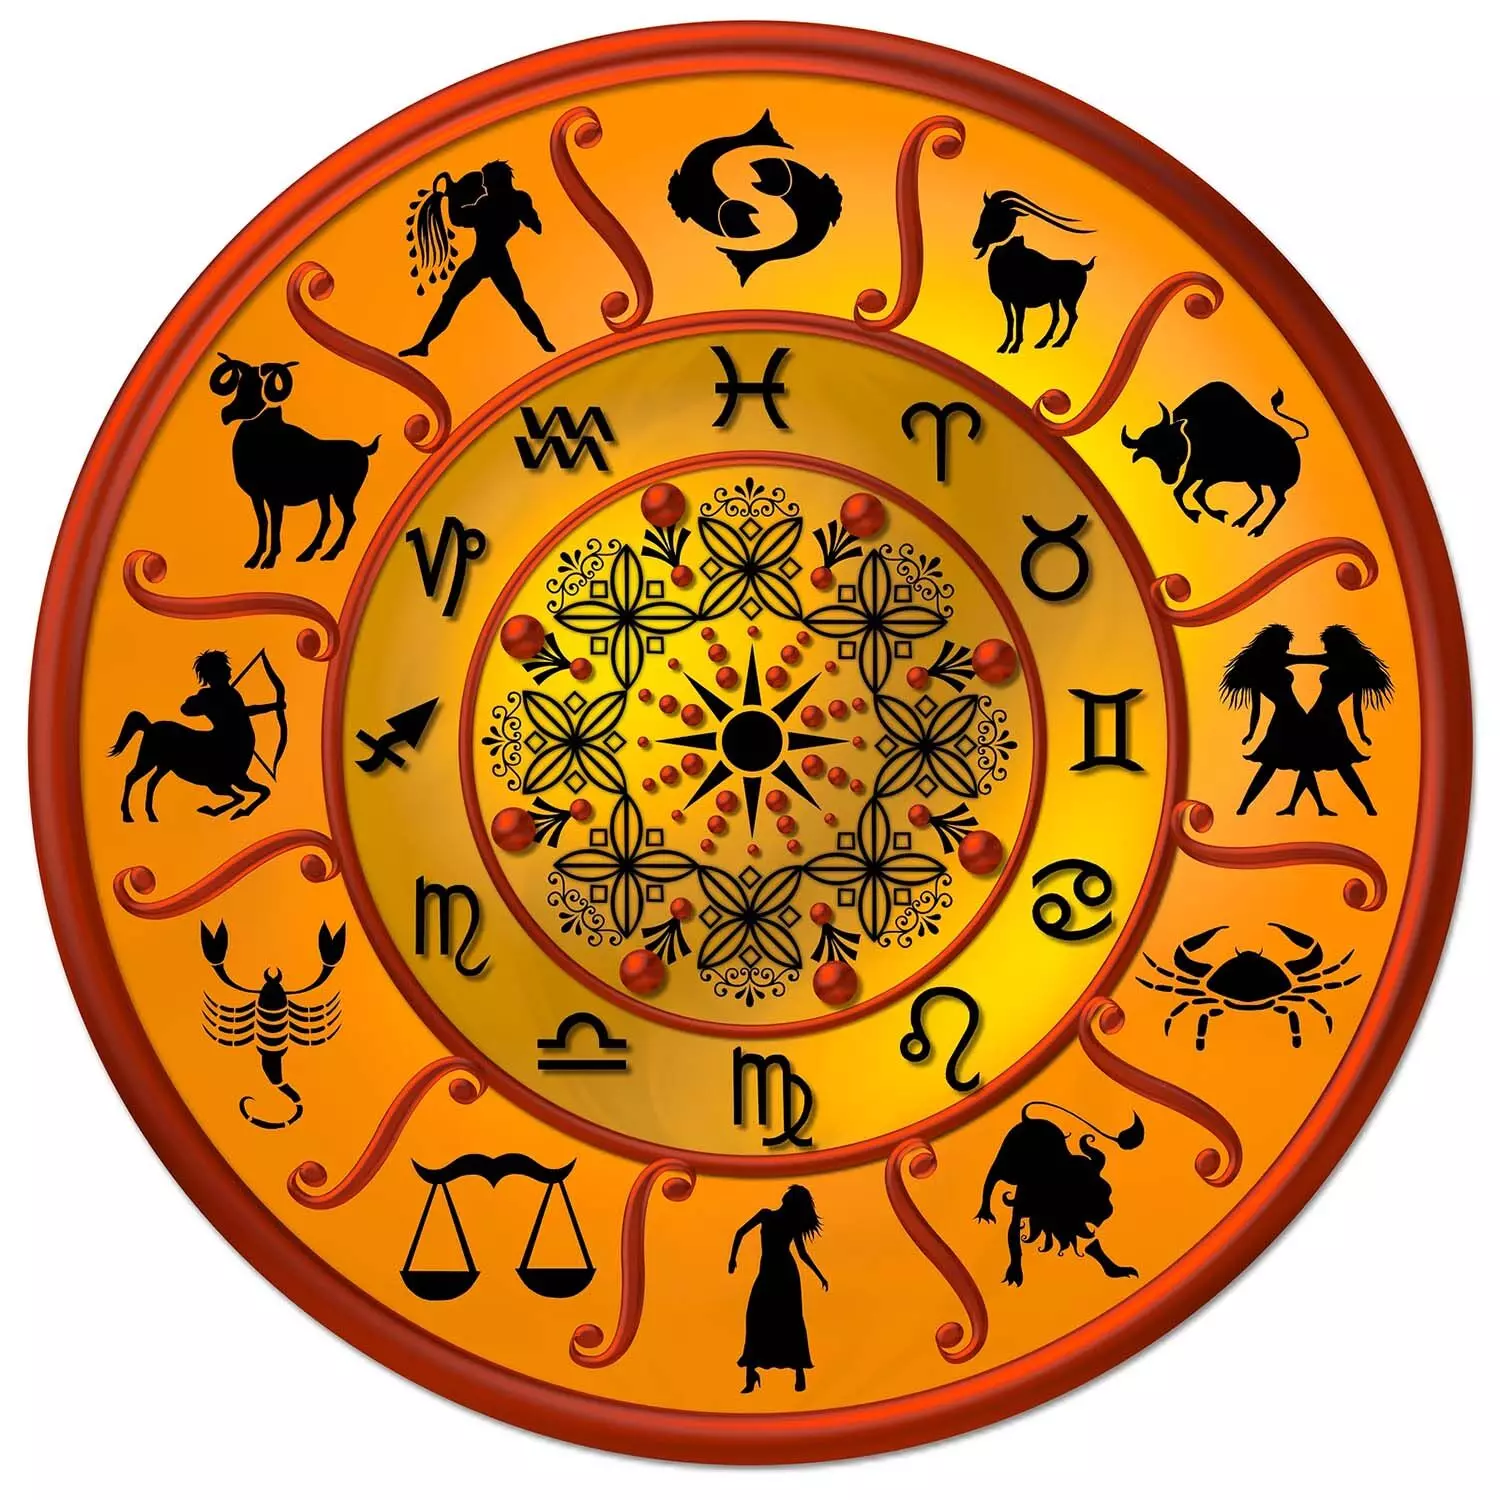 09 July – Know your todays horoscope